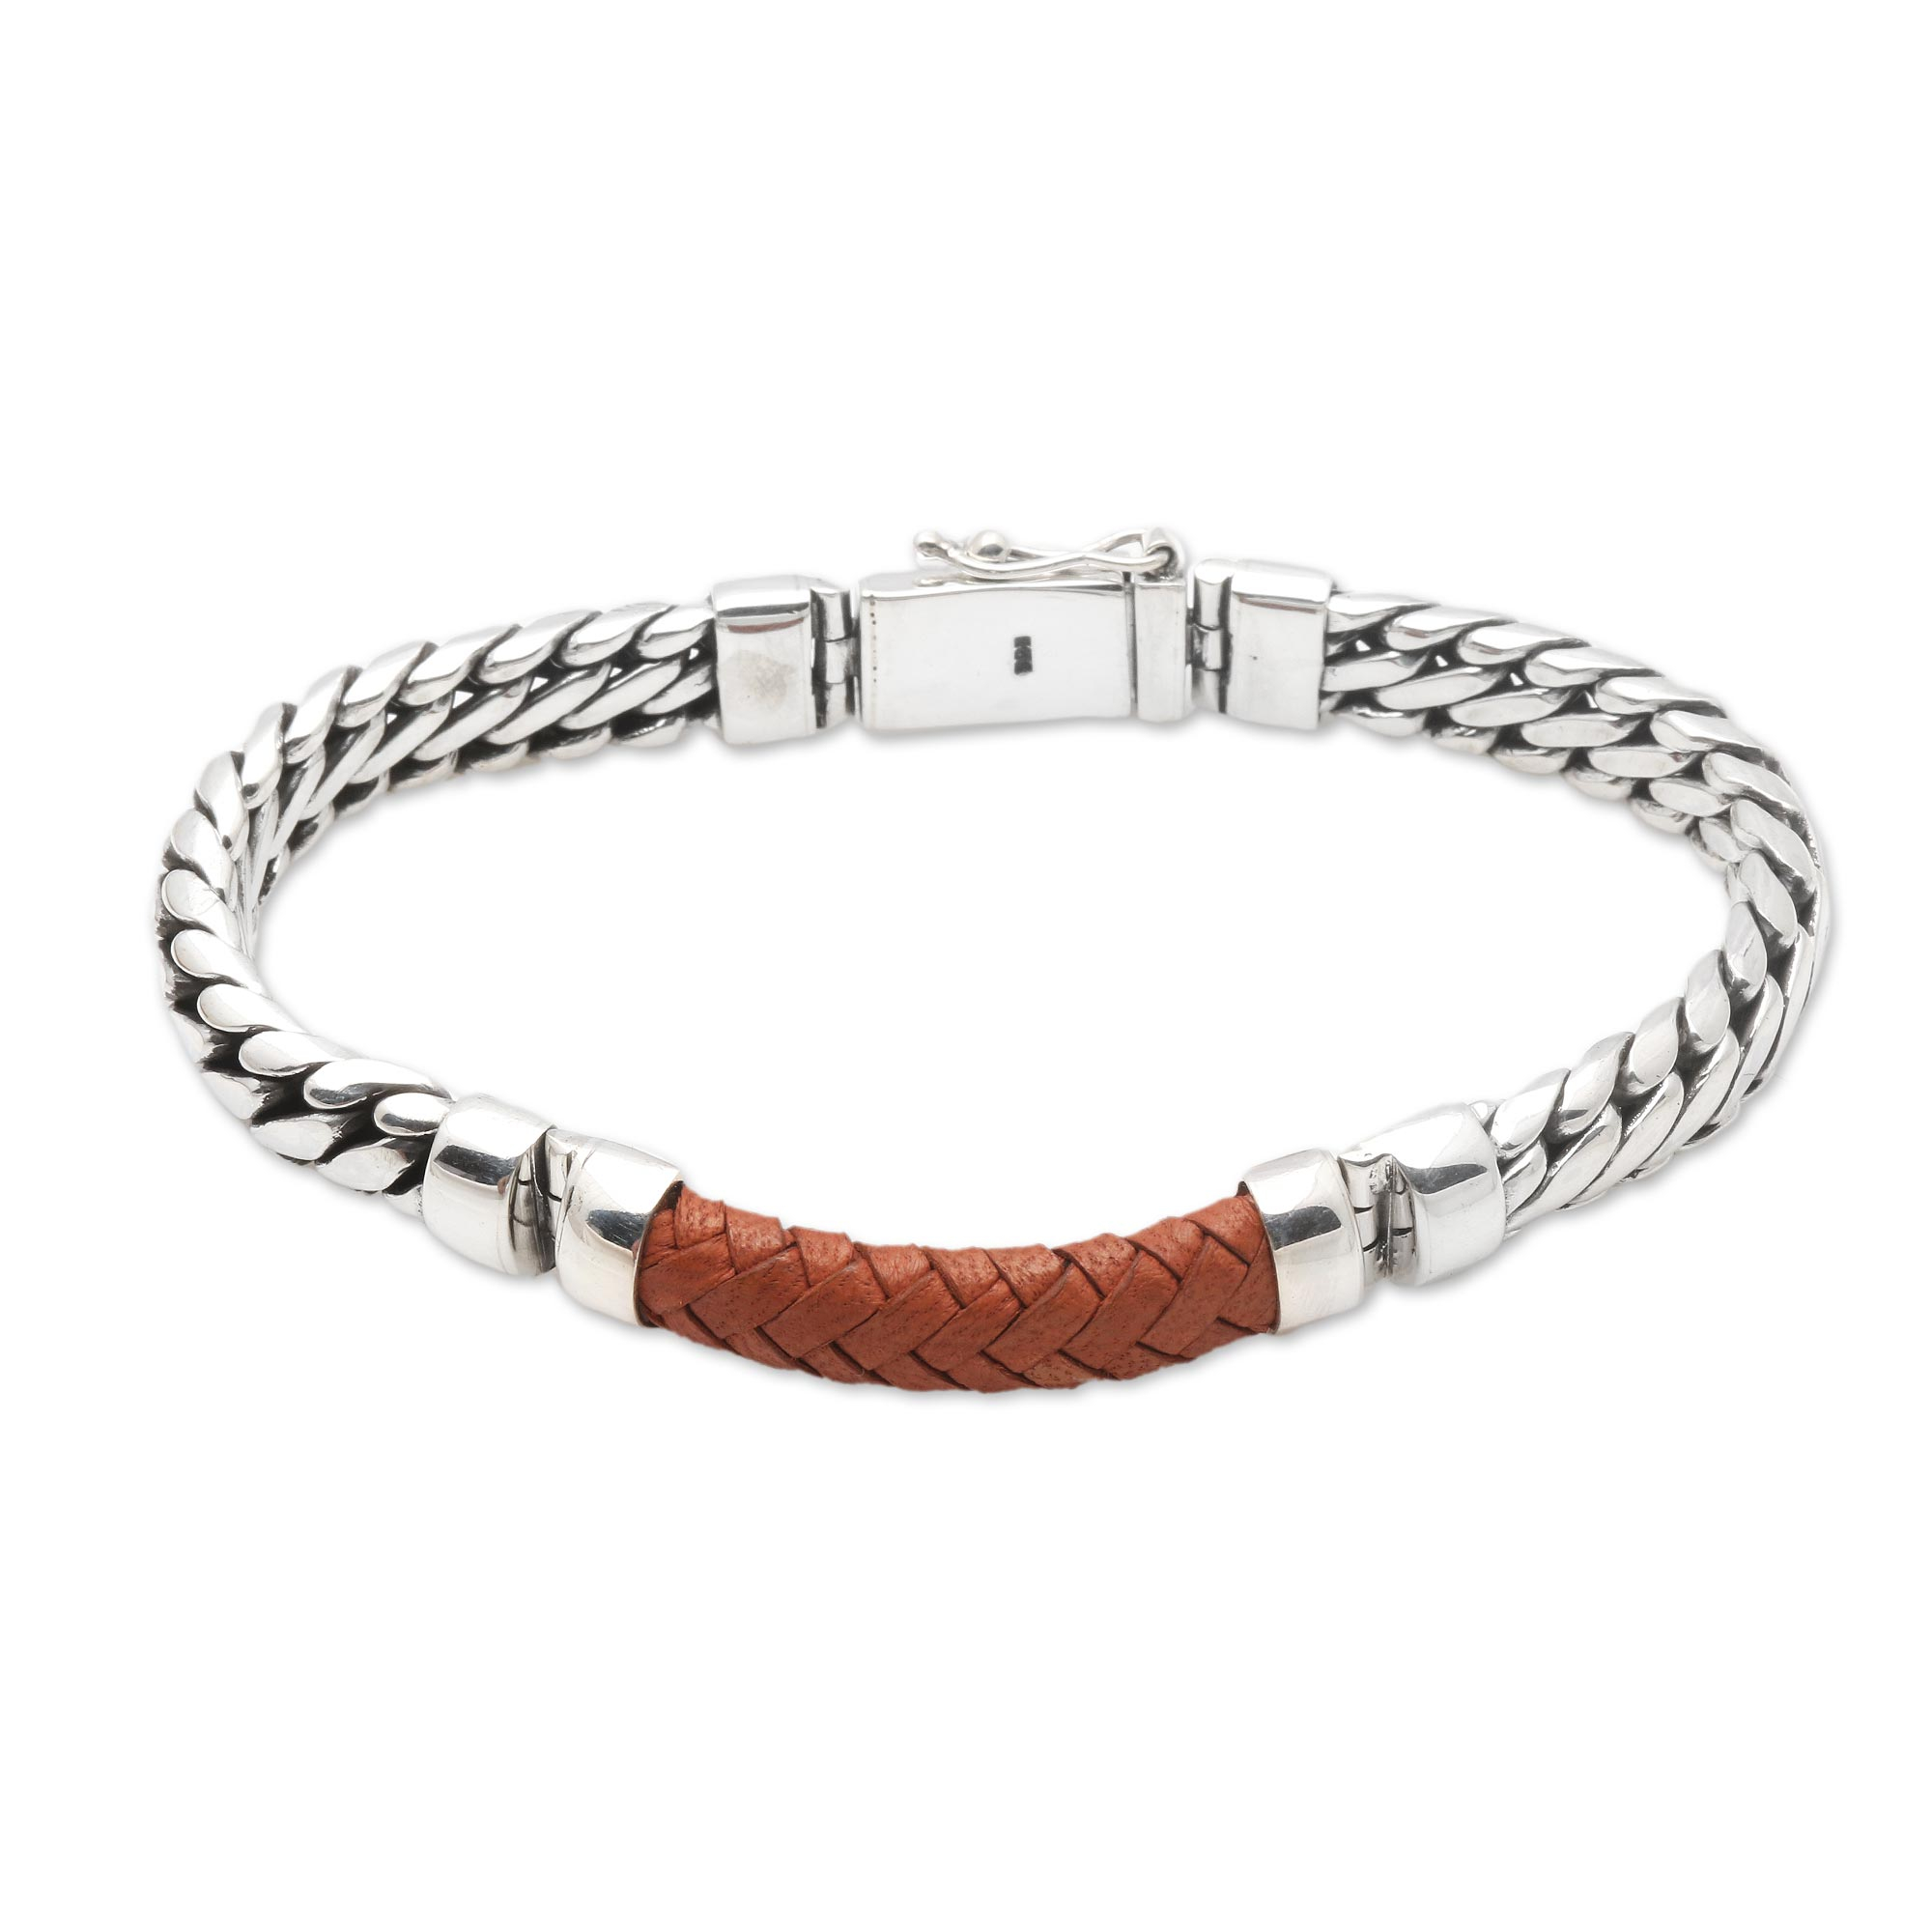 UNICEF Market  Handmade Brown Leather and Sterling Silver Wrap